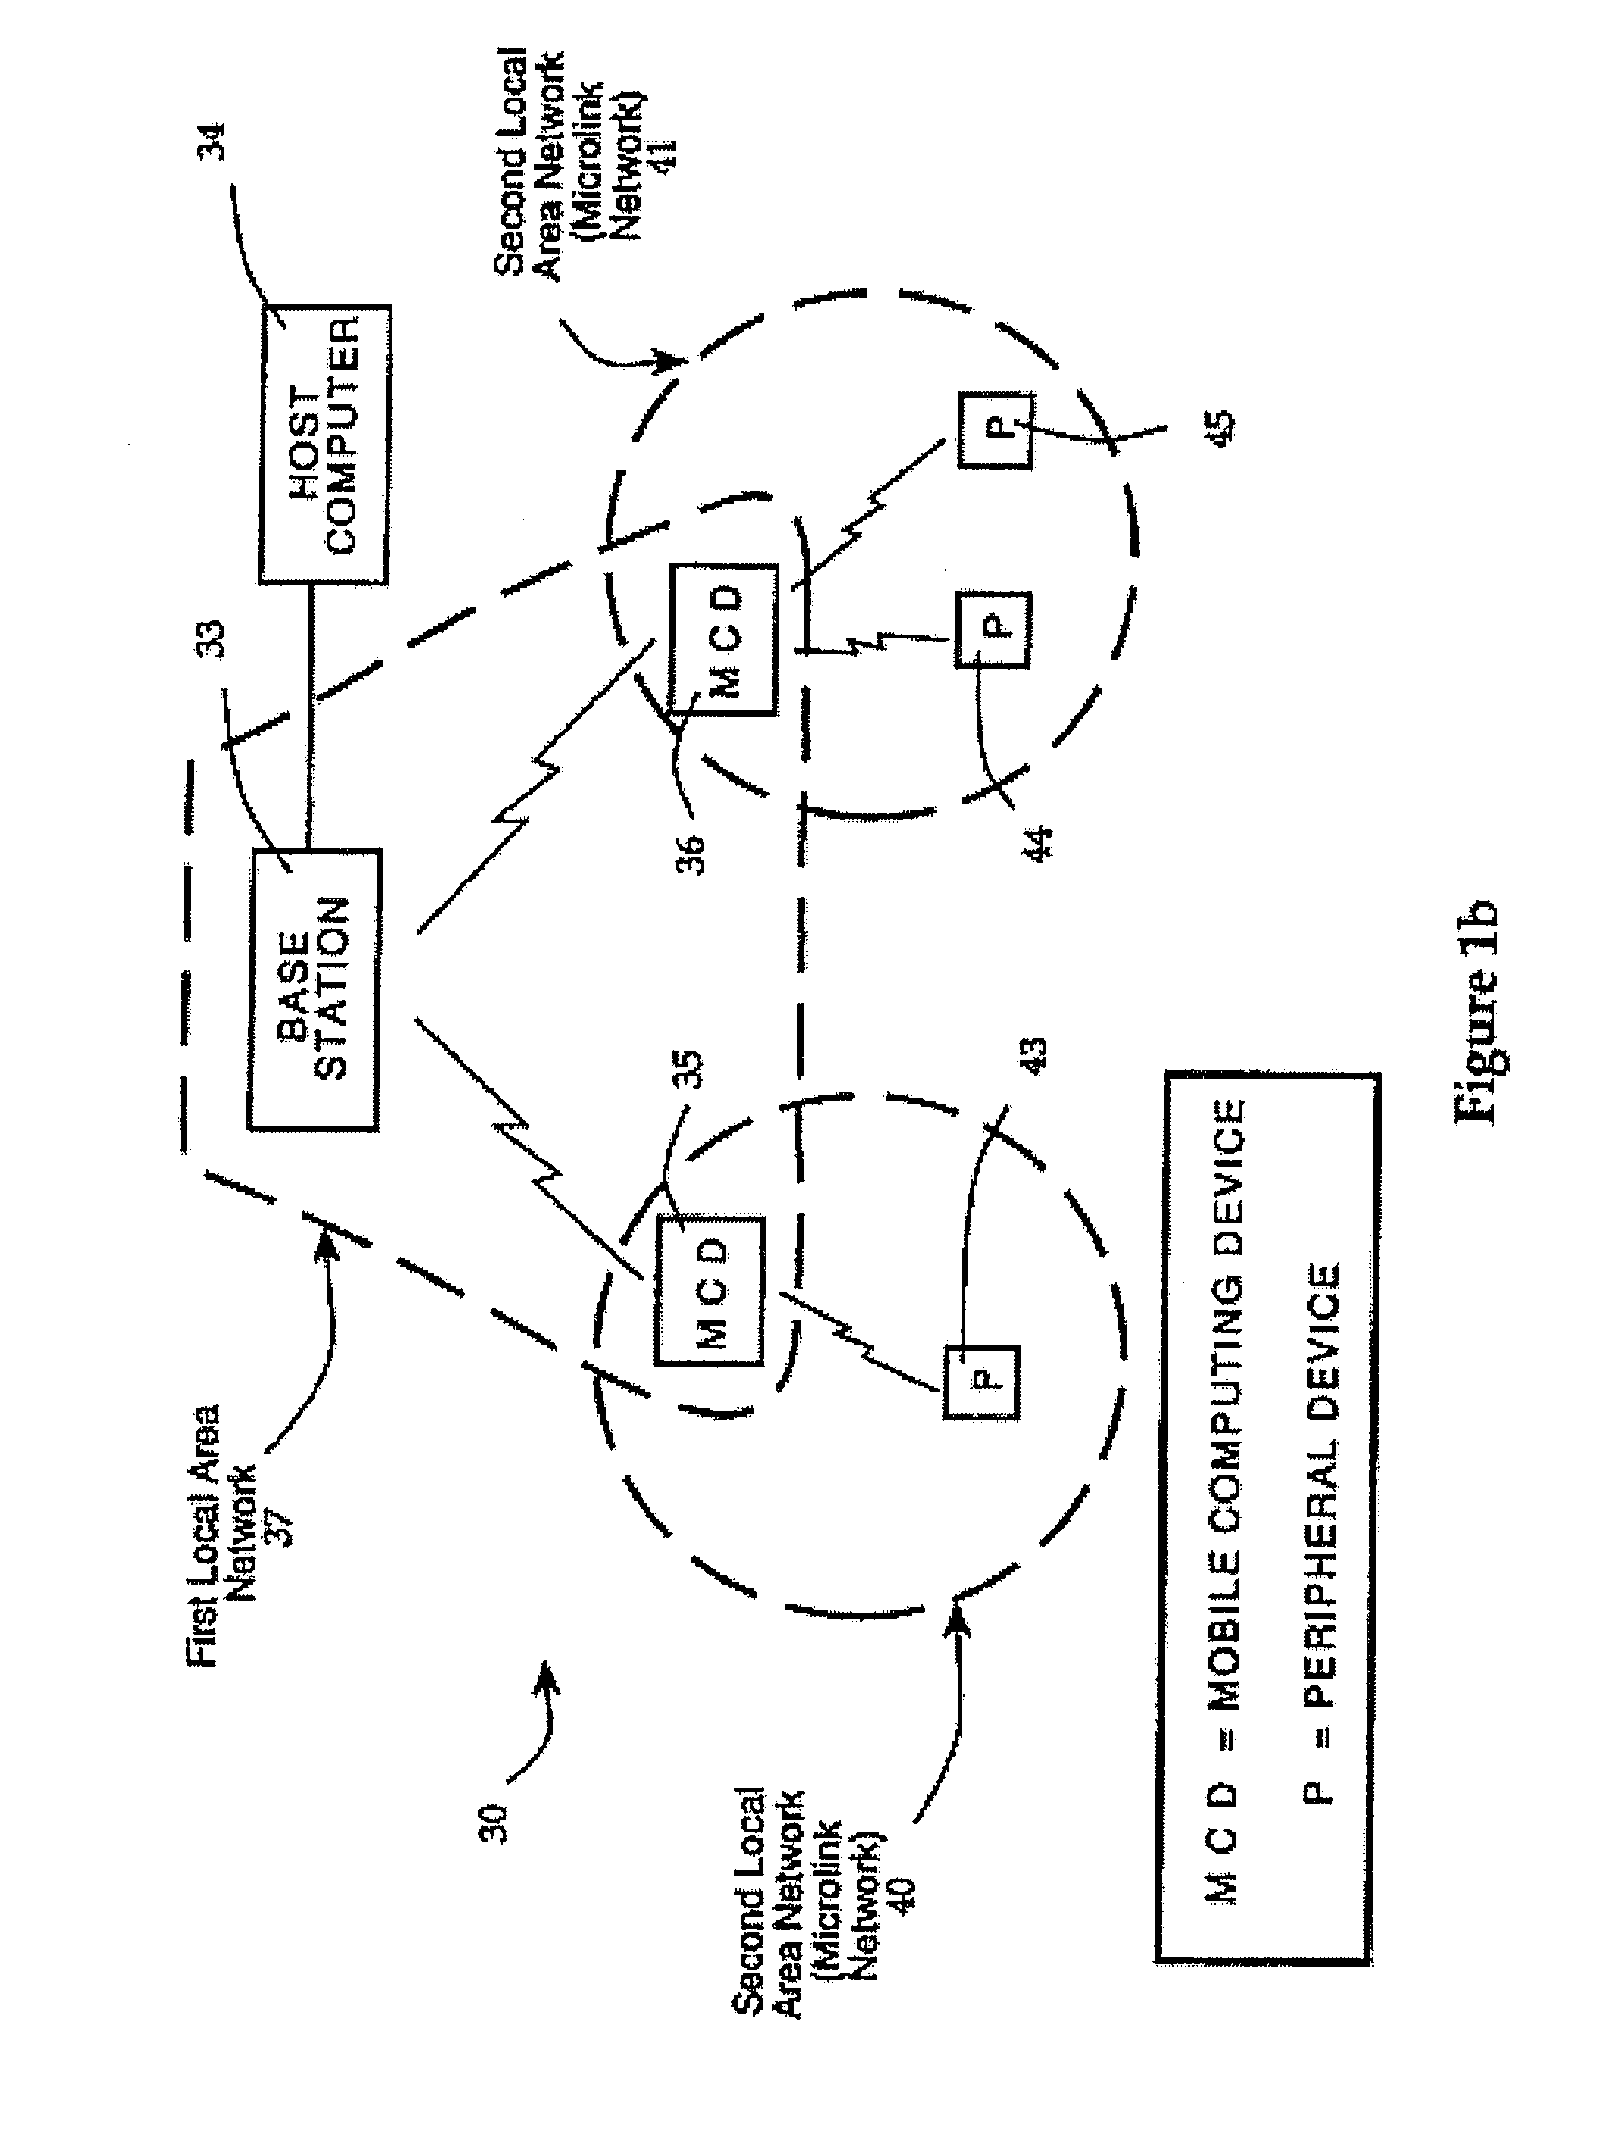 System and method for controlling communication in a multi-network environment